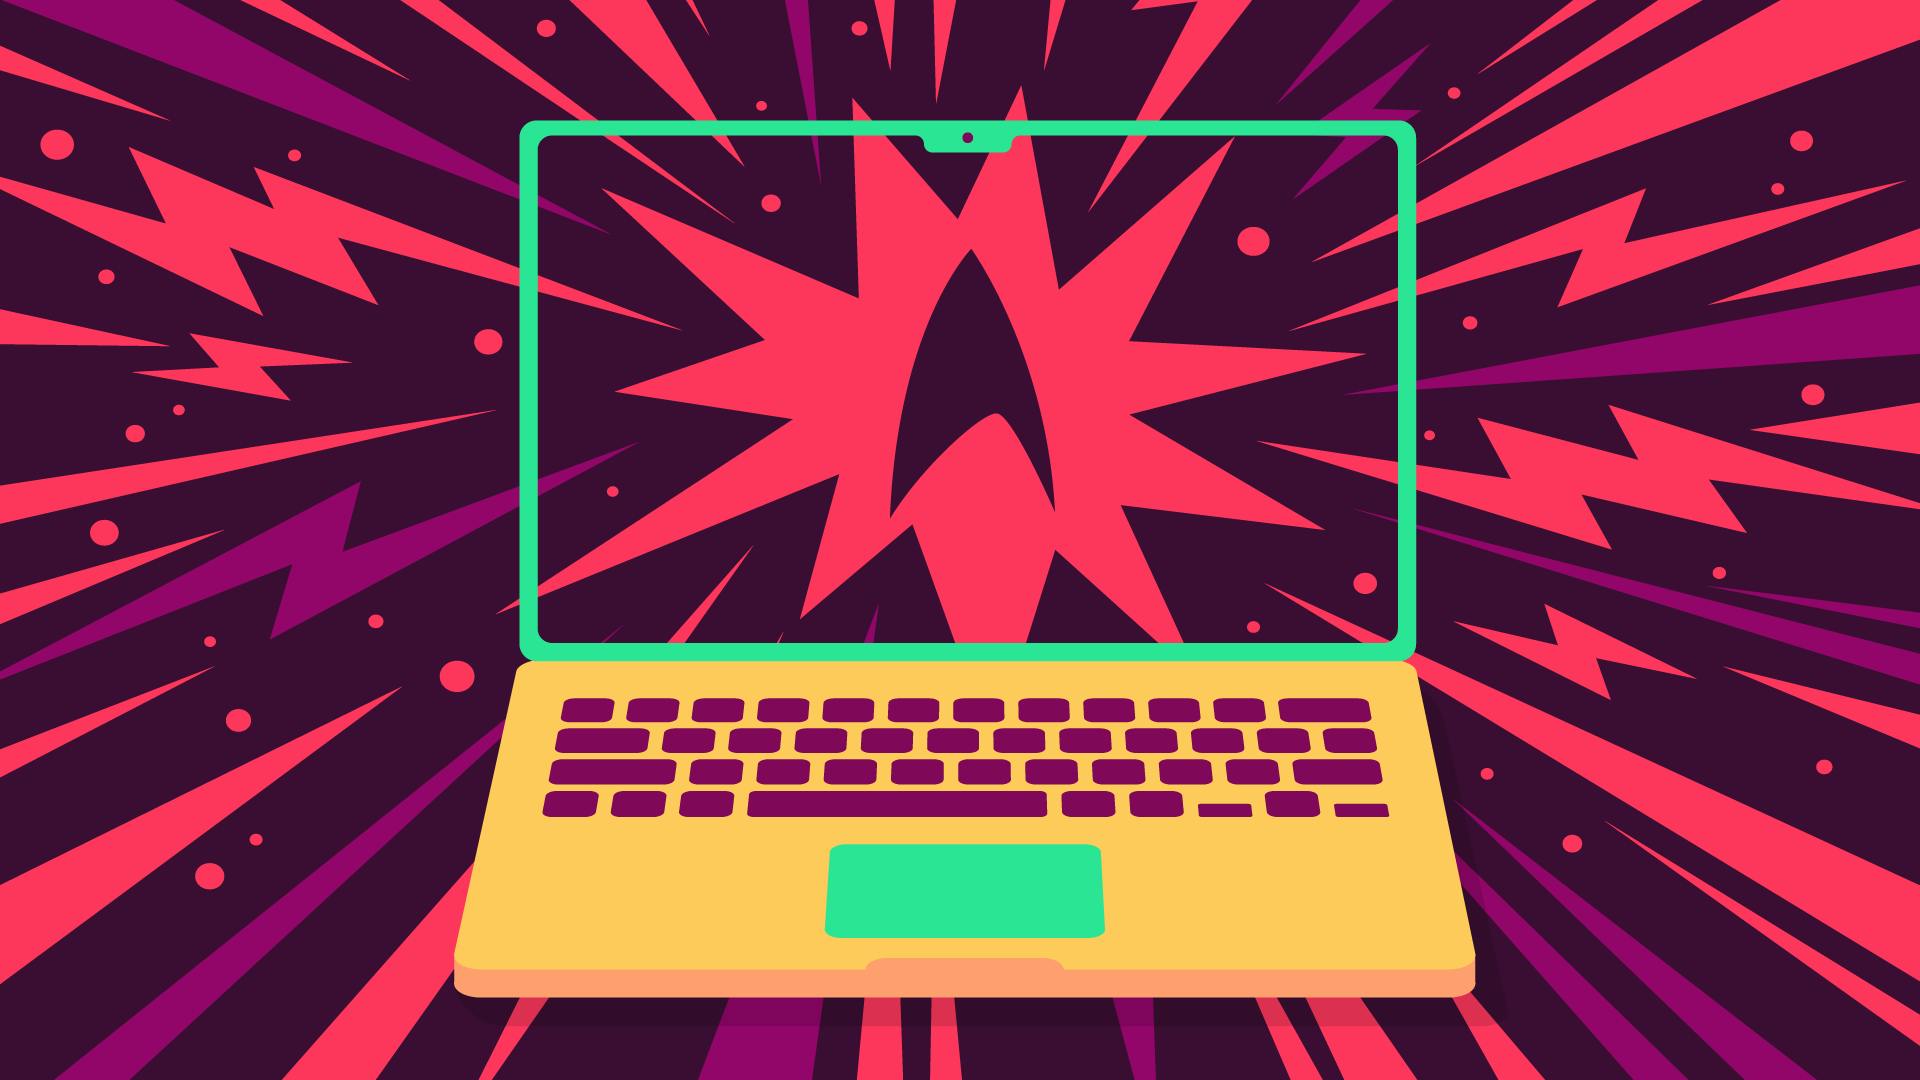 Illustration of a laptop with the Star Trek delta on the screen and lightning bolts radiating from the device